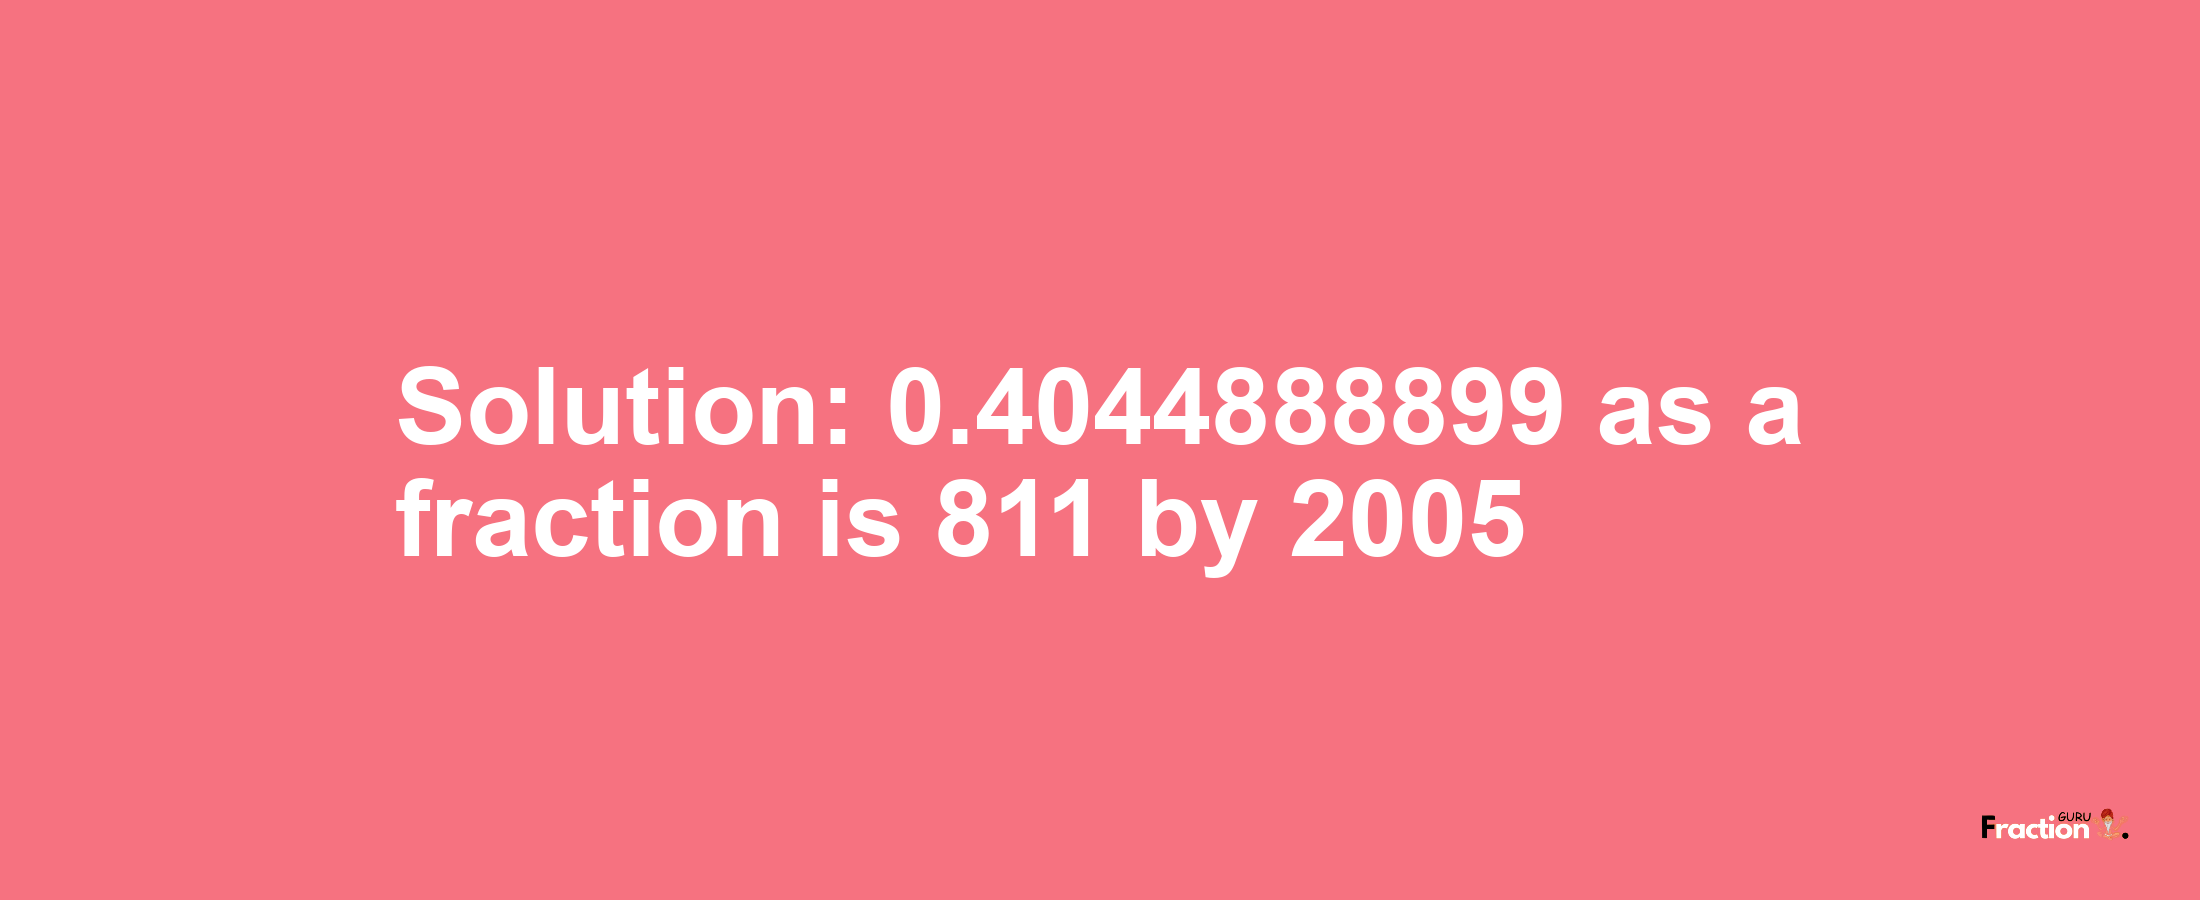 Solution:0.4044888899 as a fraction is 811/2005